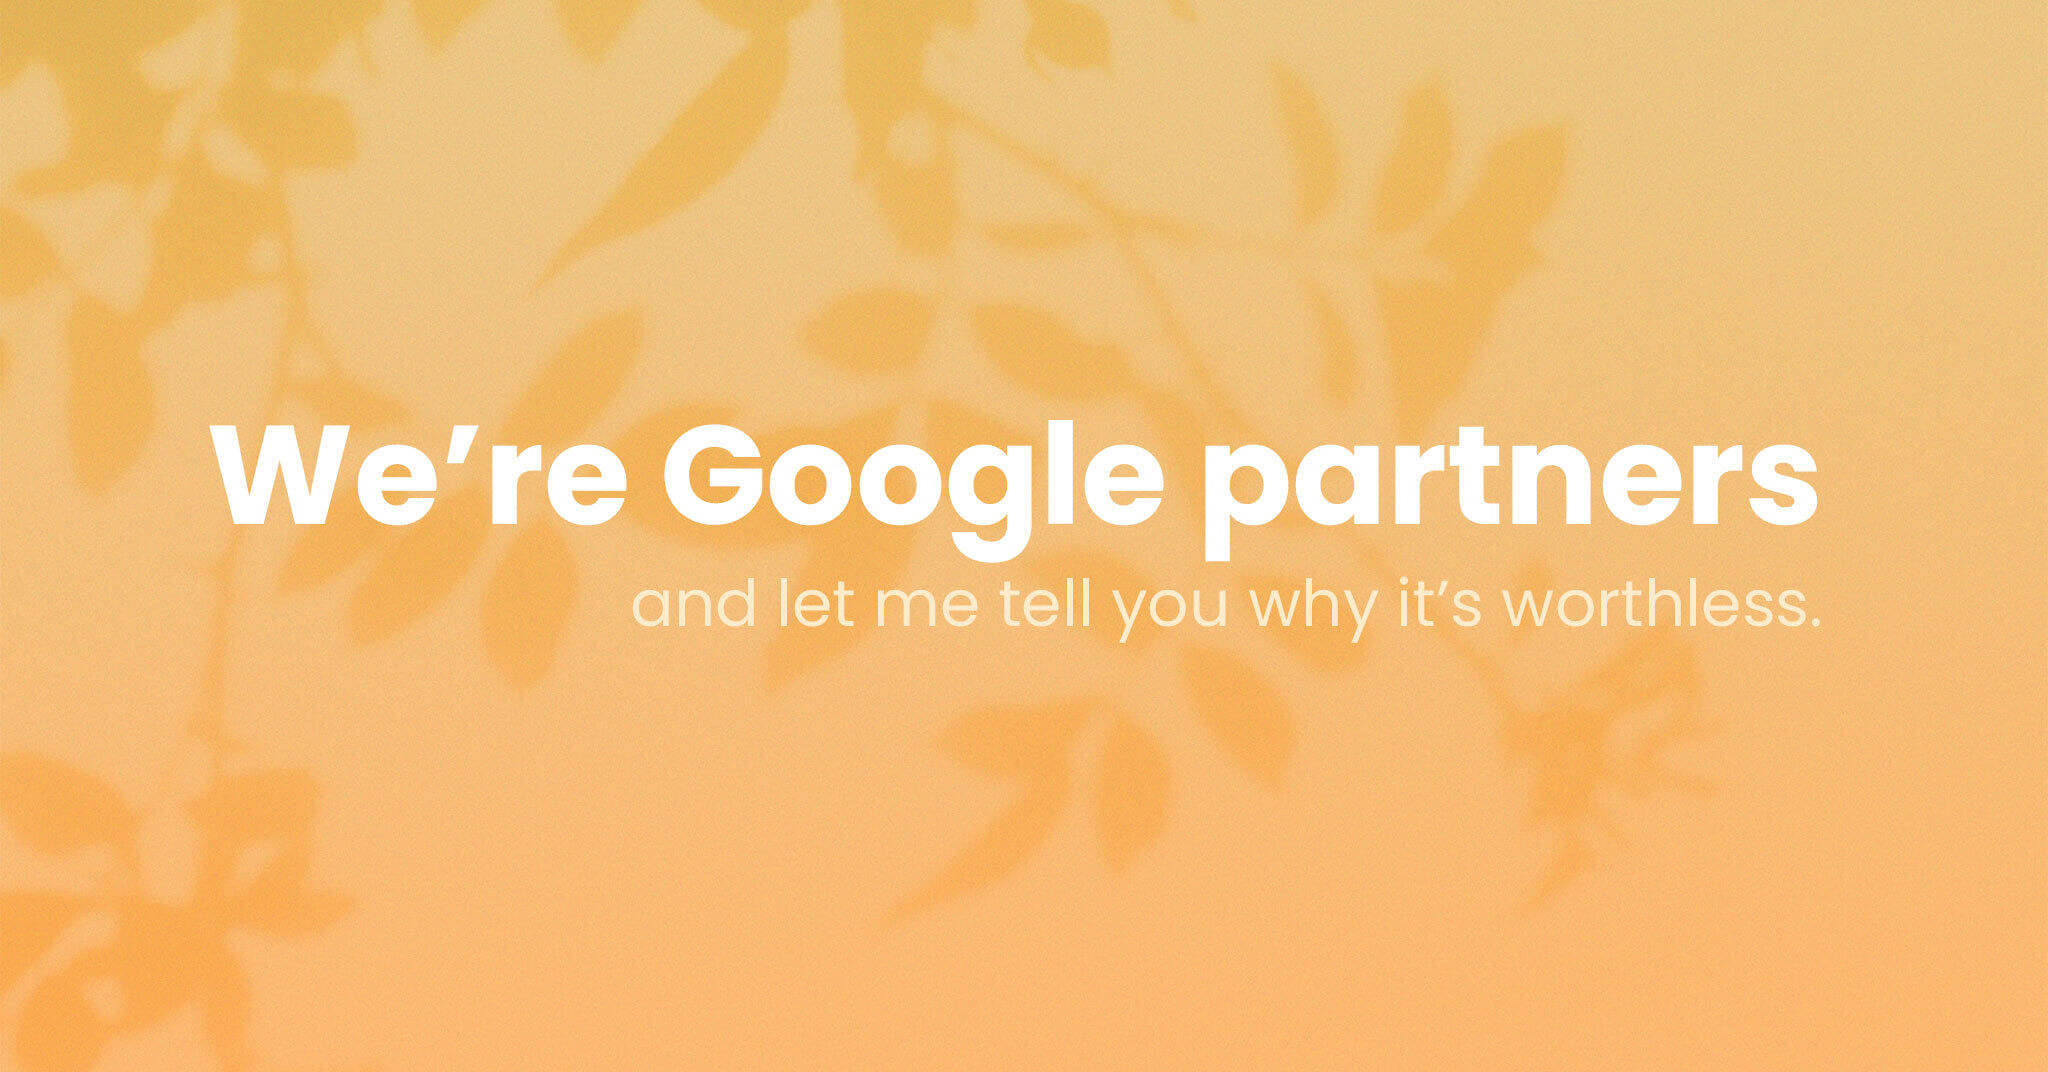 What is Google Partners and why is it worthless?